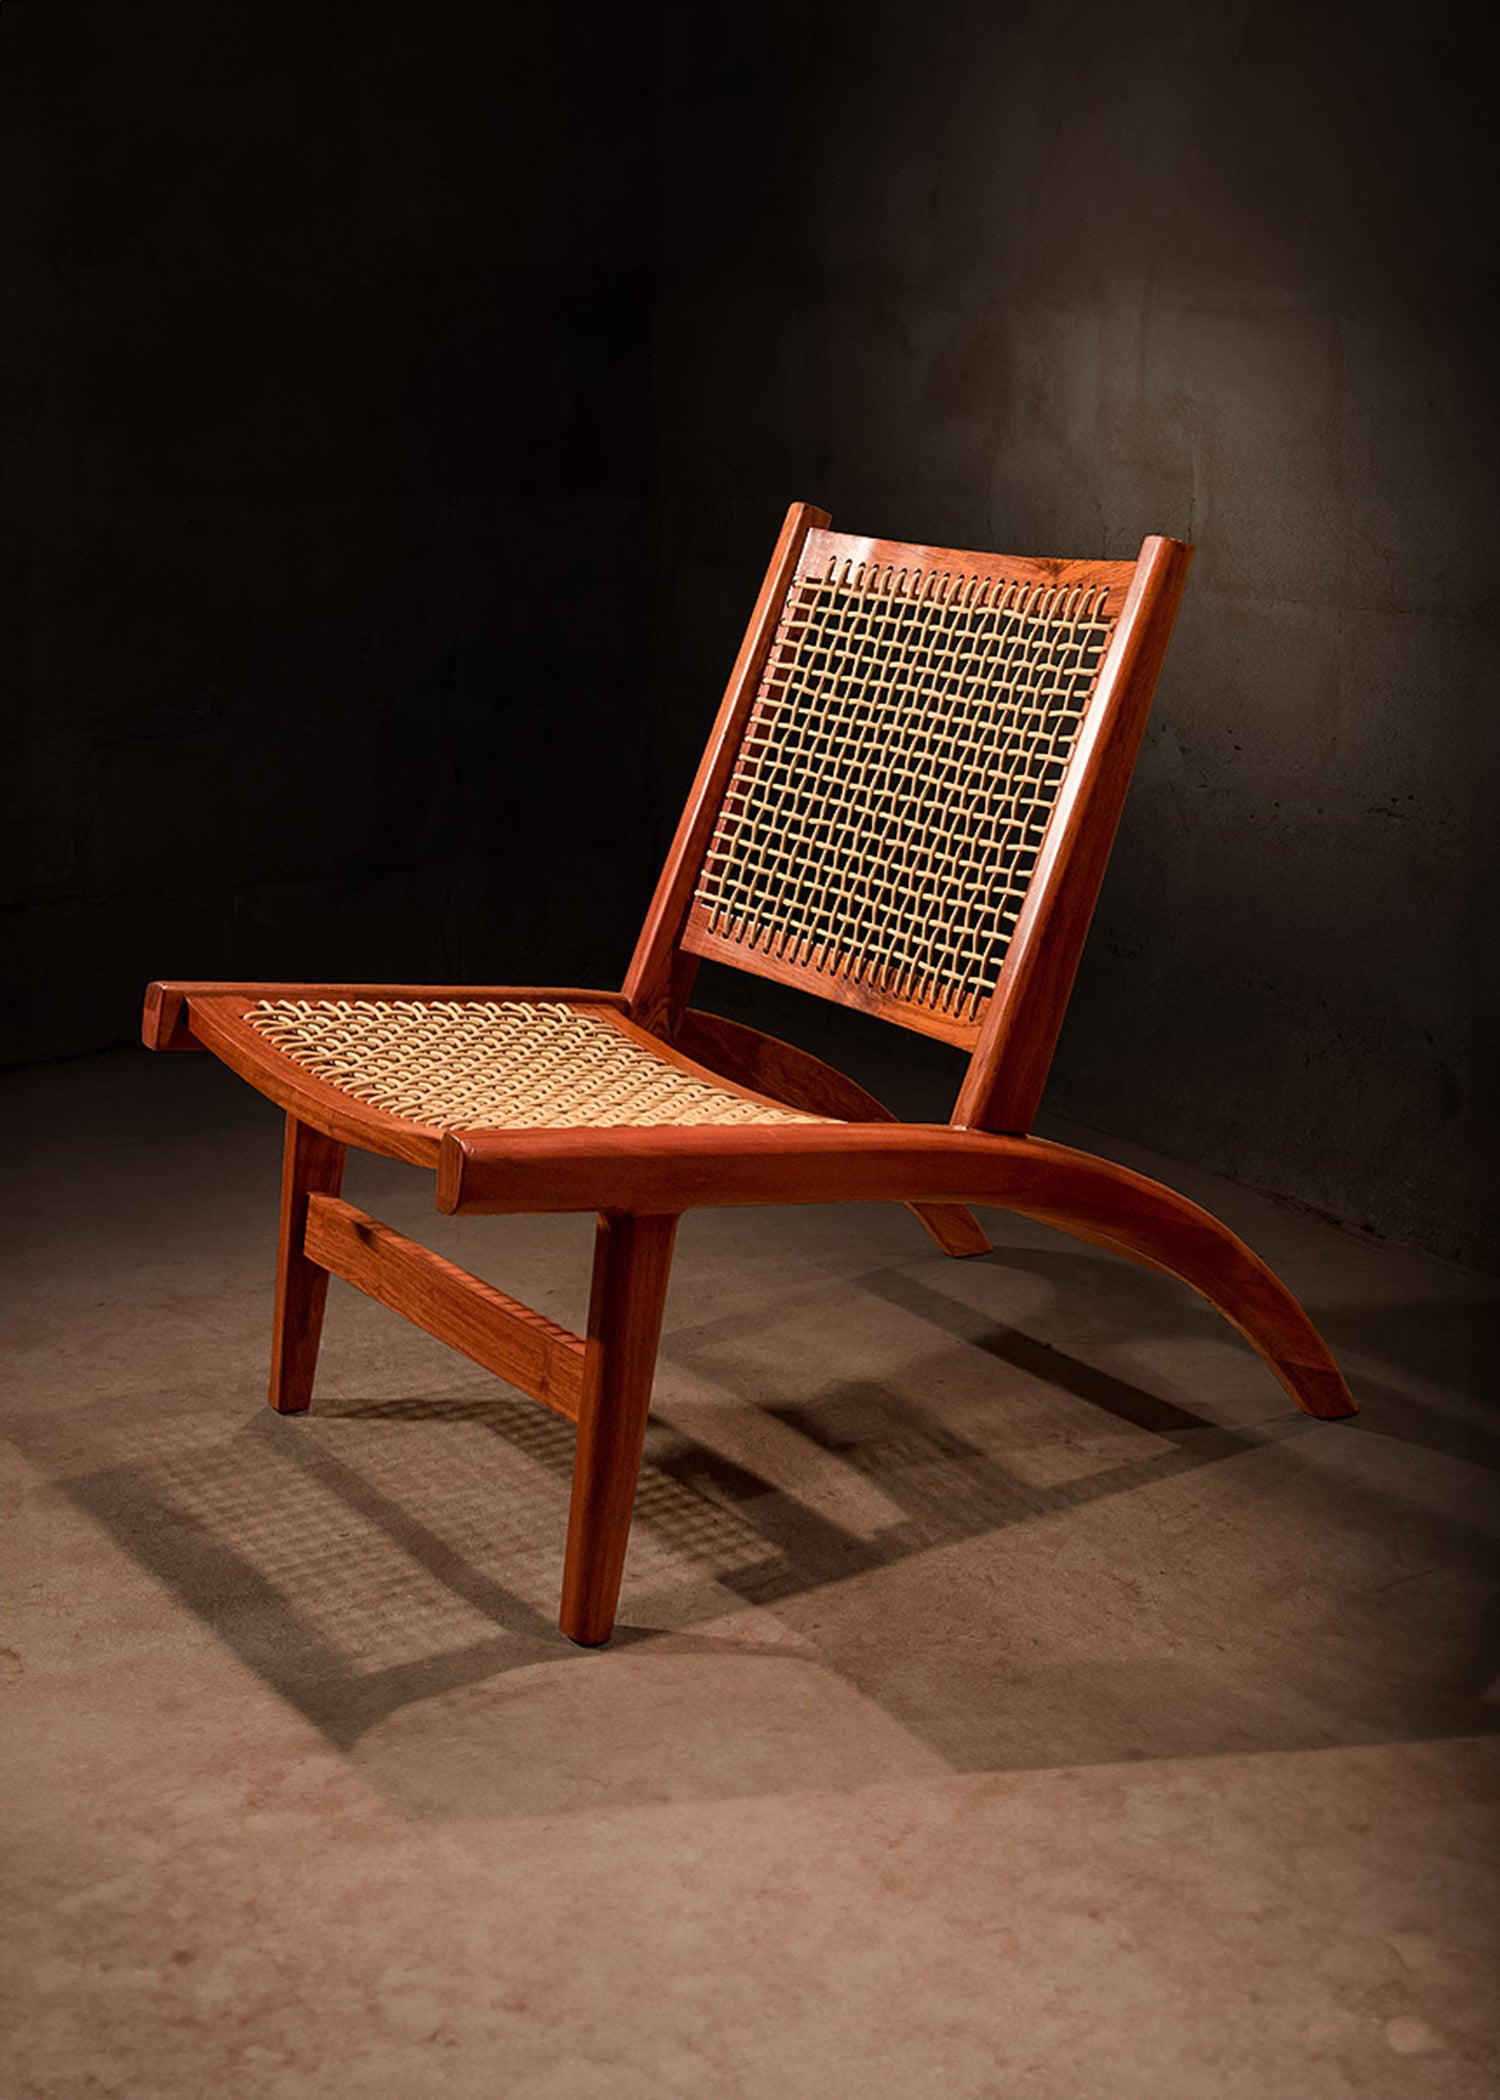 Elegant teak wood chair with a seat and backrest intricately woven from yacht sail rope, displayed against a darkened concrete backdrop, highlighting the chair's exquisite curves and the contrasting textures that evoke luxury and comfort